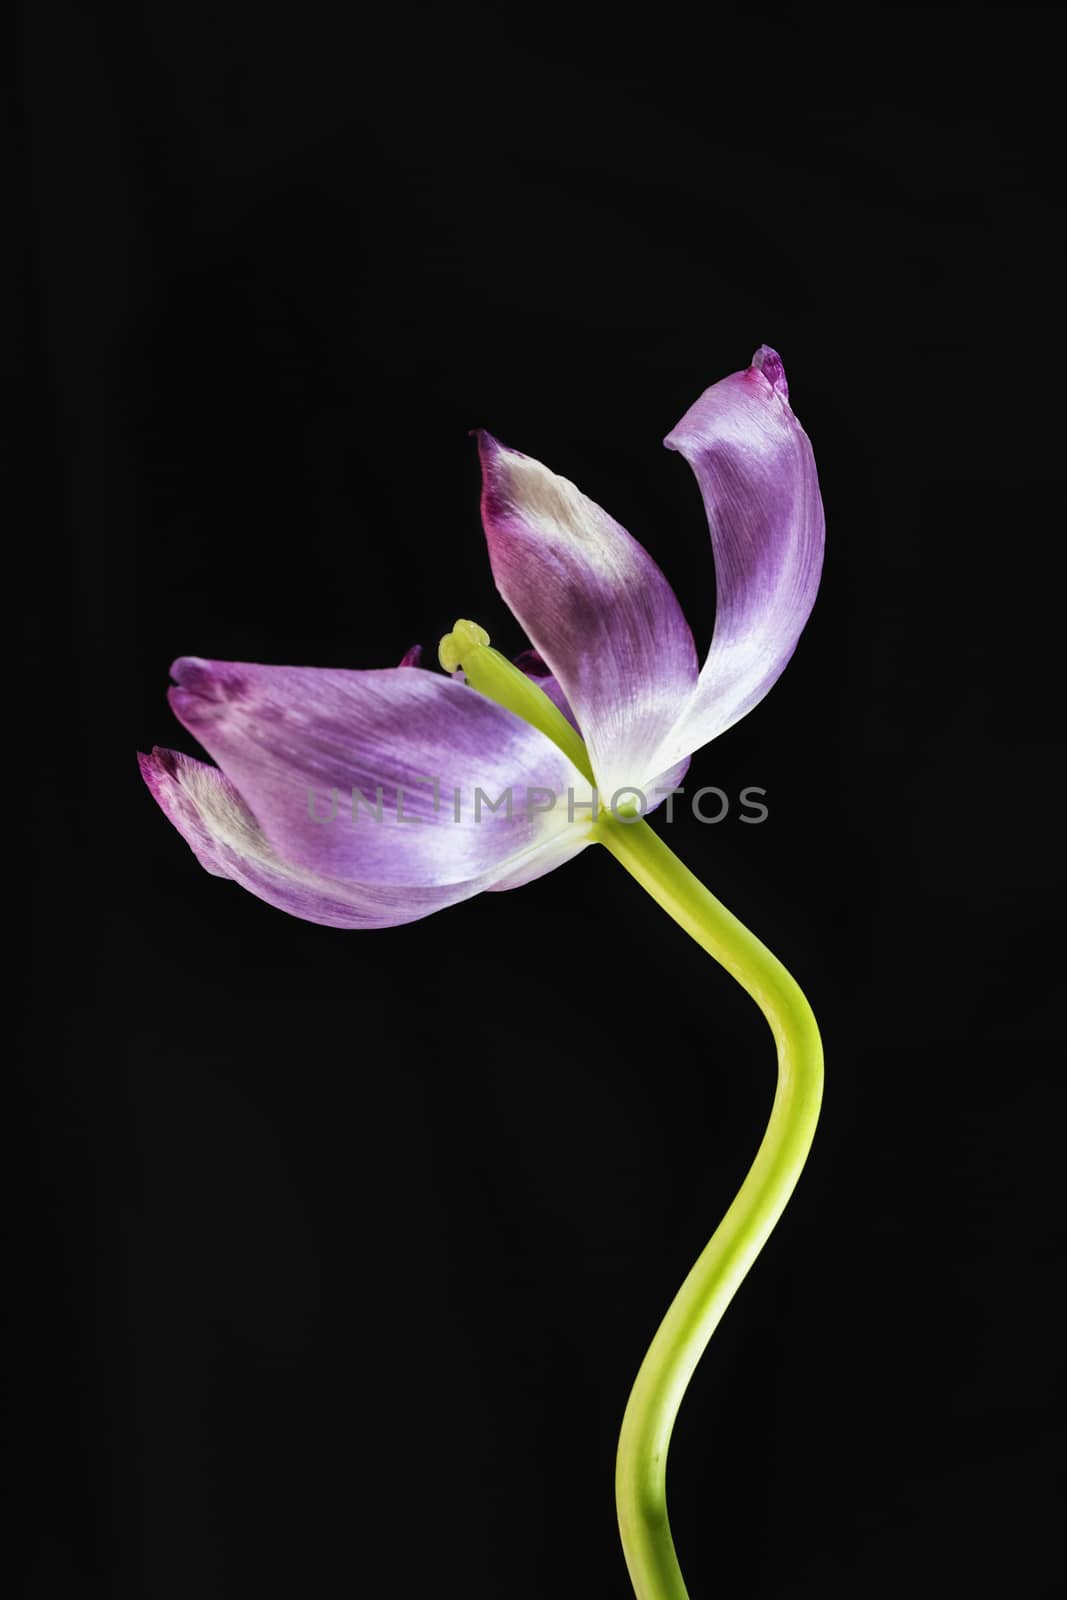 One pink and white tulip in bloom on black background , beautiful green stem